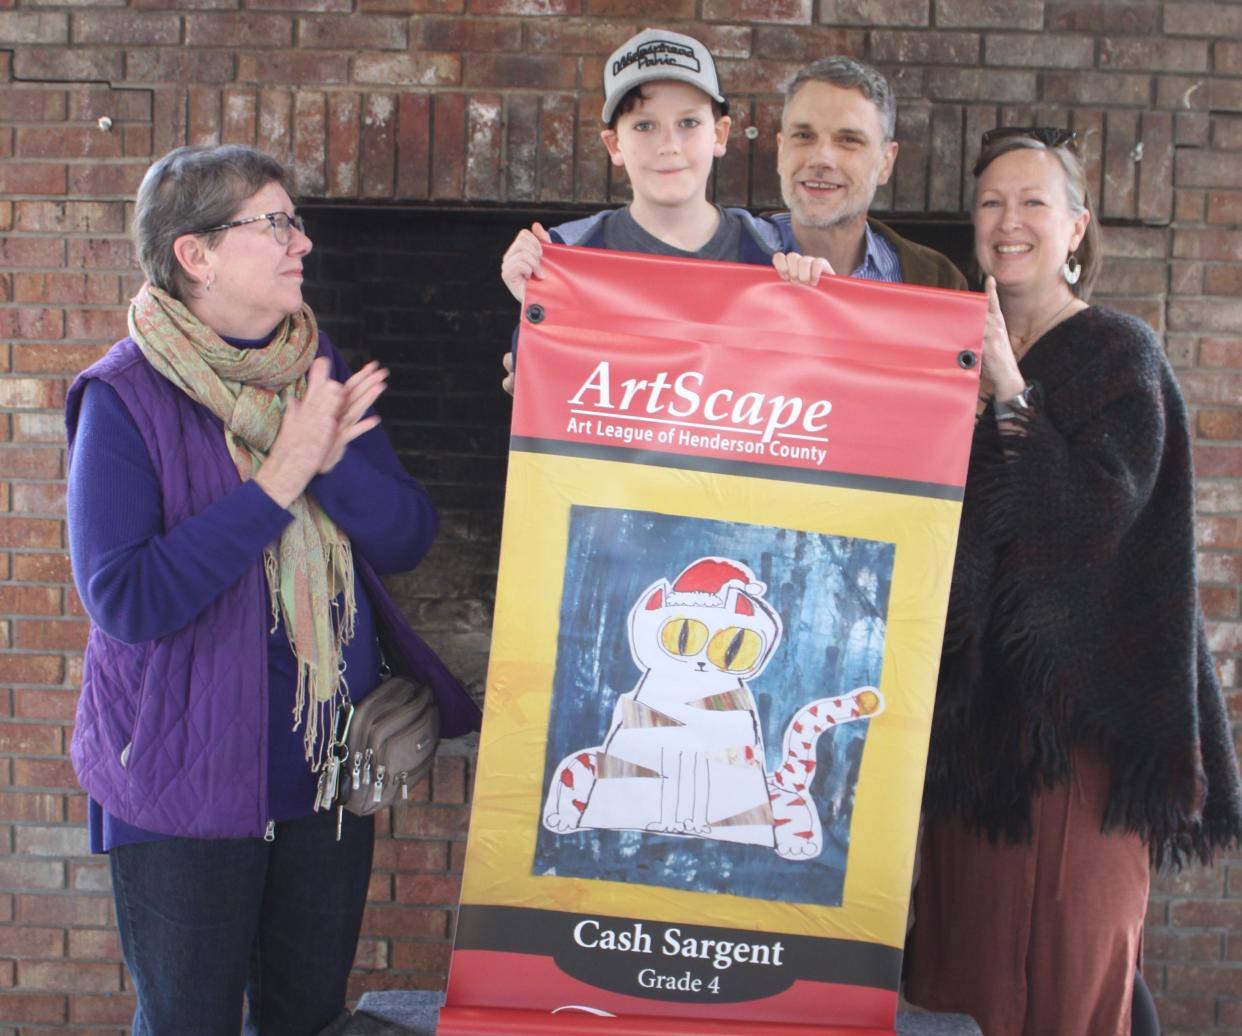 Fourth grader Cash Sargent poses with his banner and his family at the reveal event held last week at Jackson Park.